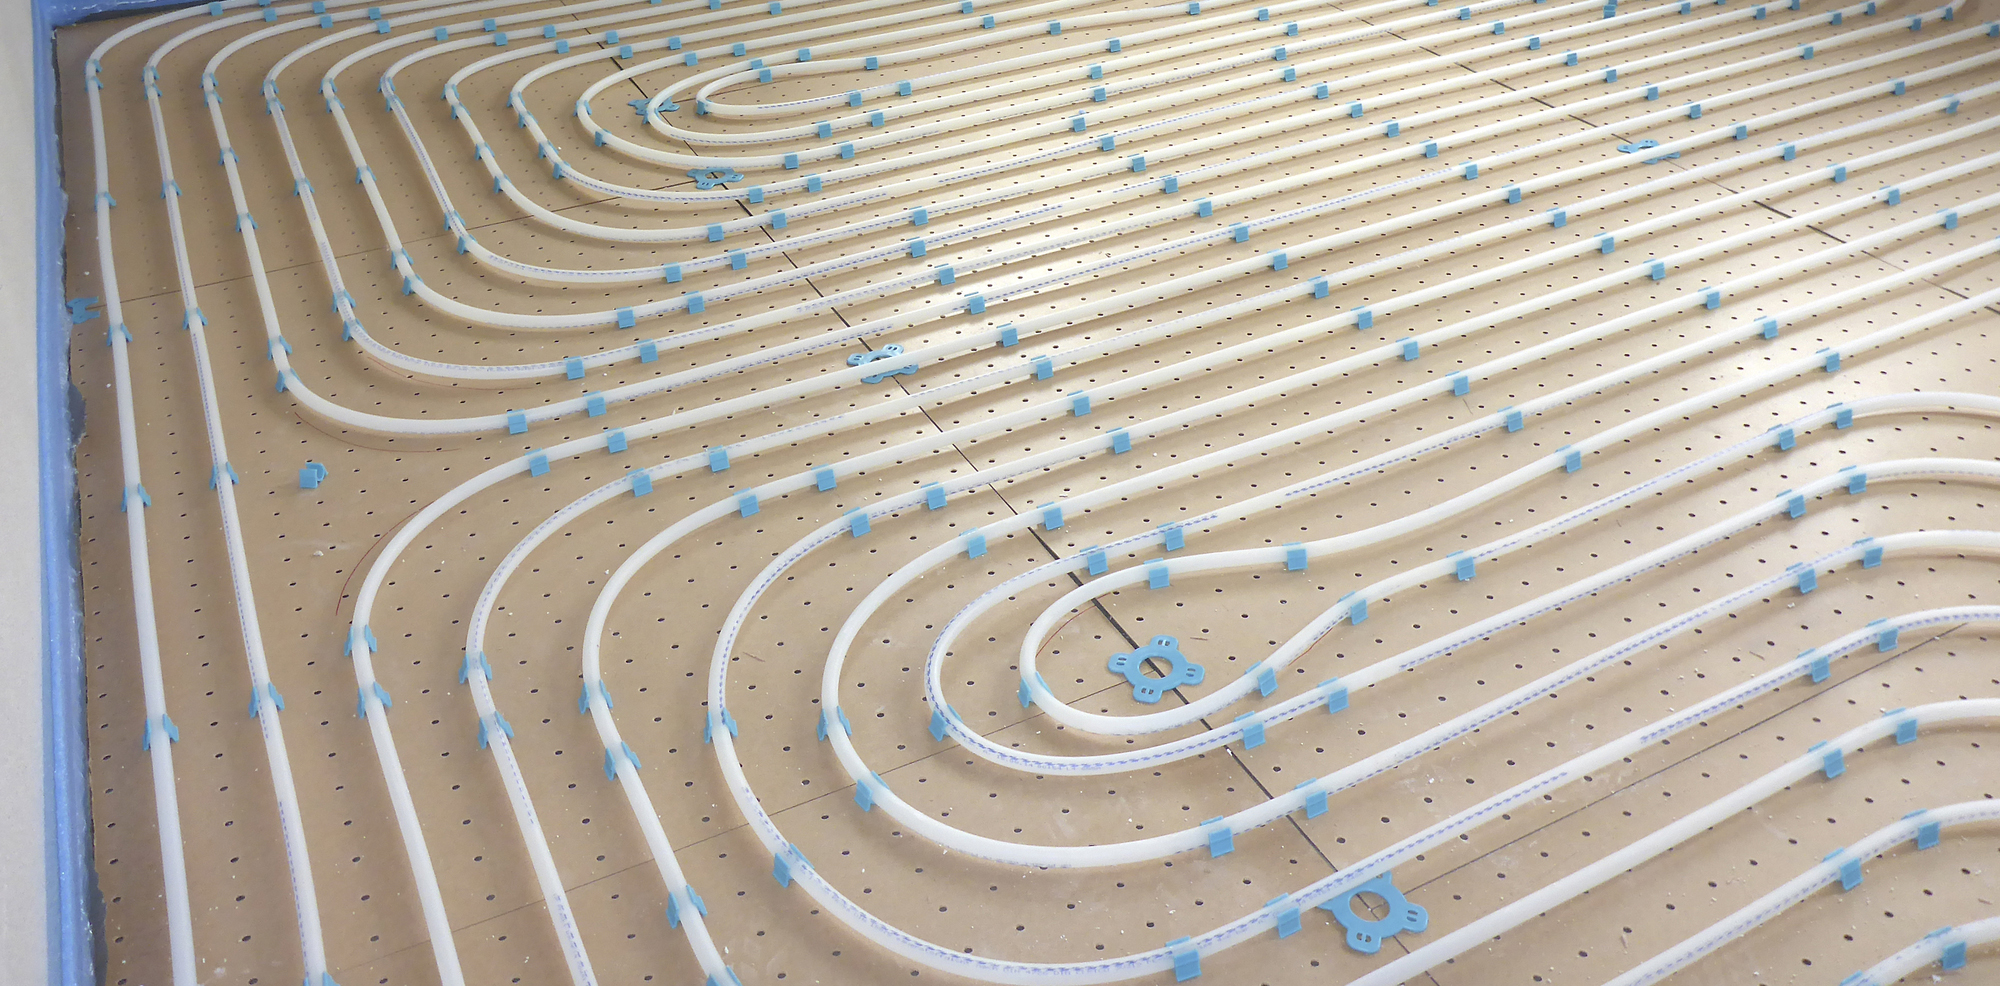 Wet underfloor heating system in a newly constructed house, shown before floor is laid on top.